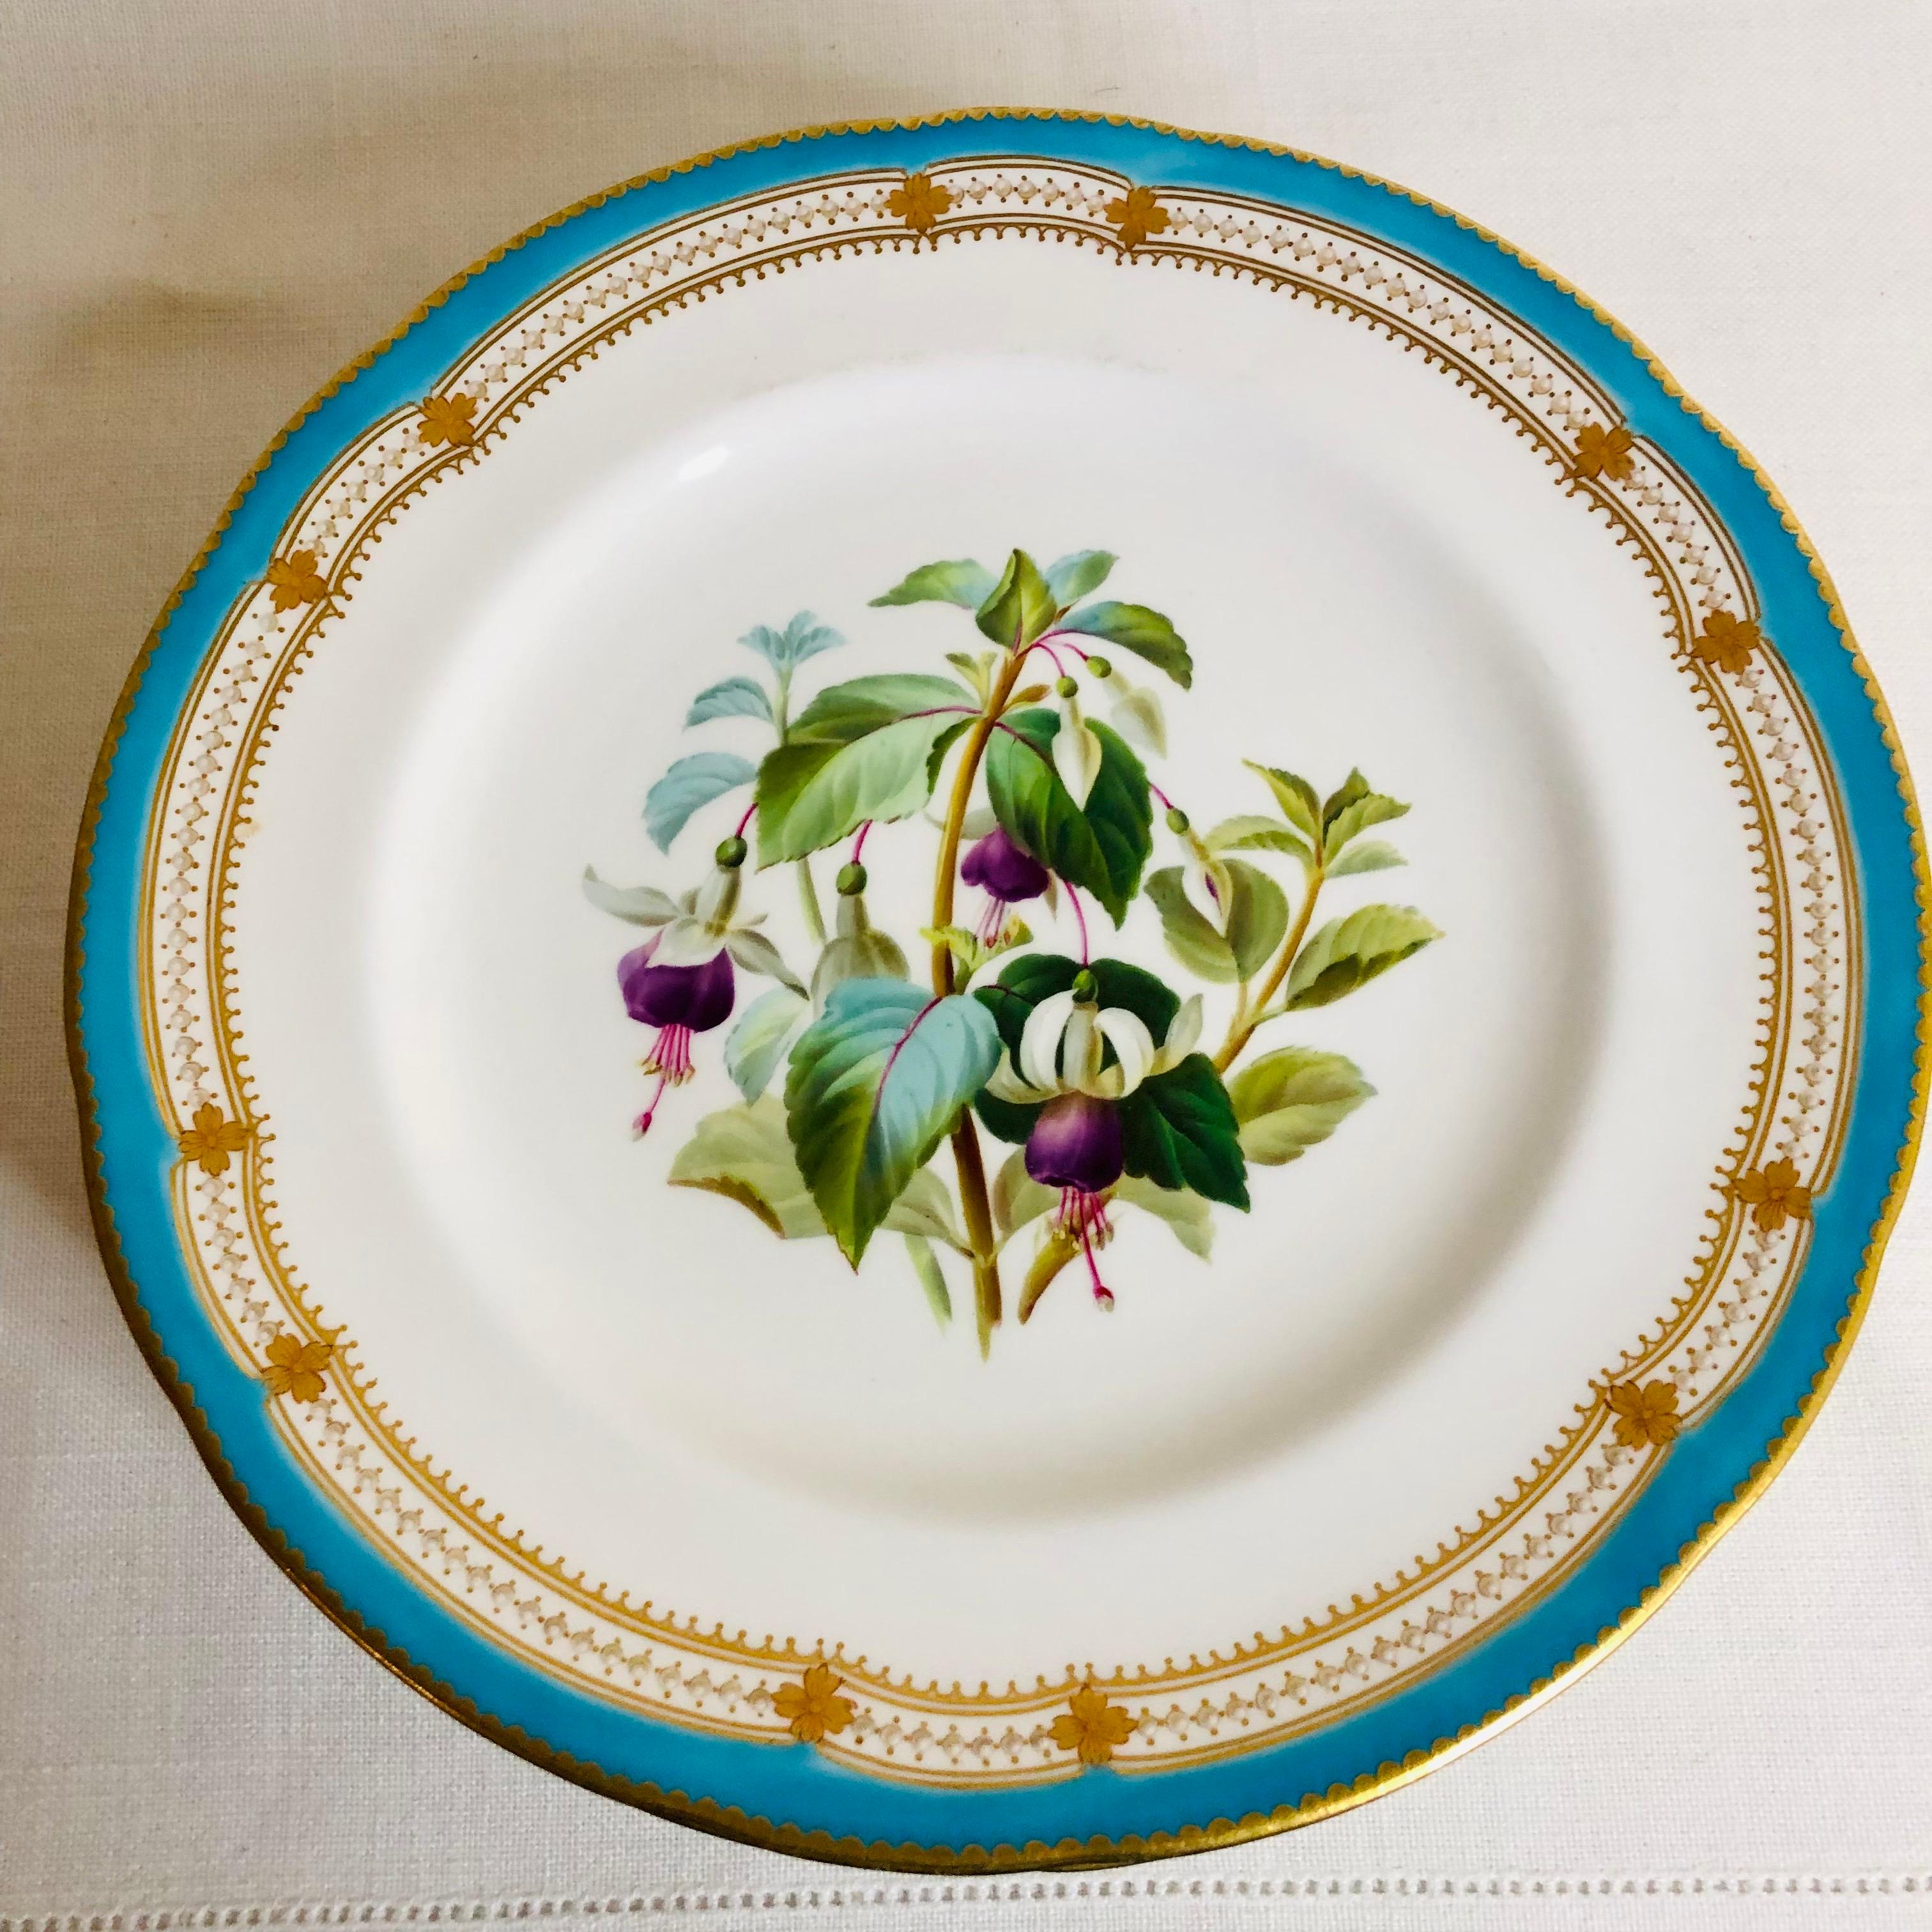 Set of 16 Rare Minton Plates Each Hand-Painted with a Different Flower Bouquet 5